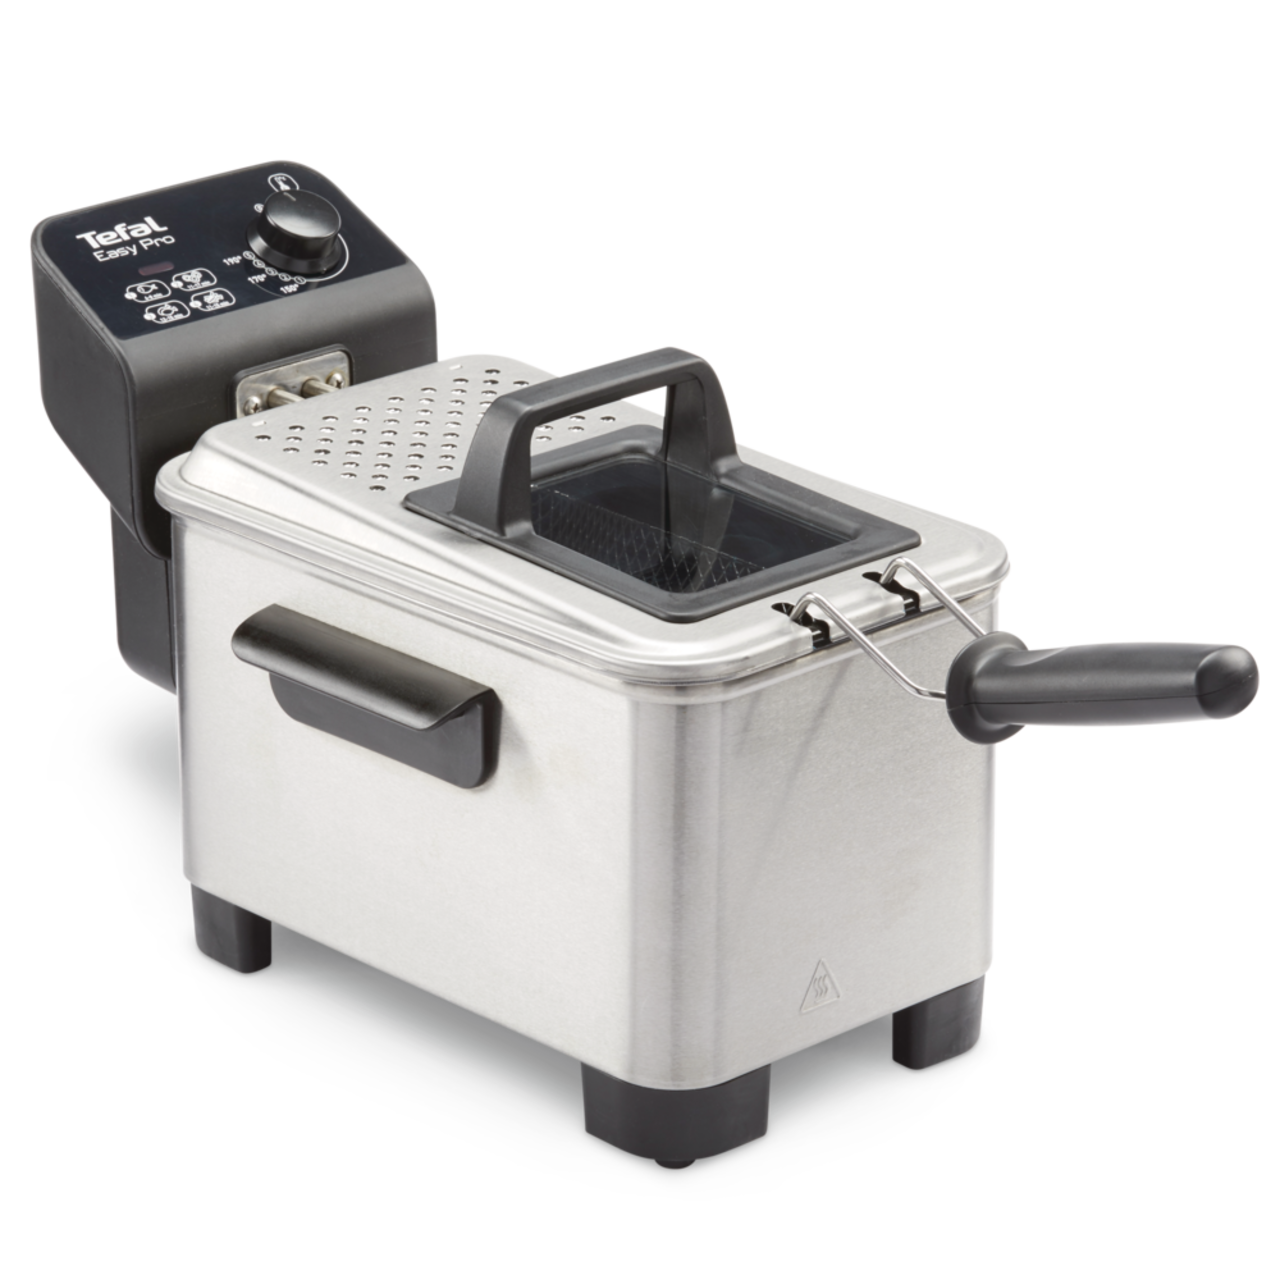 https://media-www.canadiantire.ca/product/living/kitchen/kitchen-appliances/0435734/t-fal-easy-pro-fryer-d31922ae-07e4-40c2-afe0-ebf90e3ef252.png?imdensity=1&imwidth=640&impolicy=mZoom